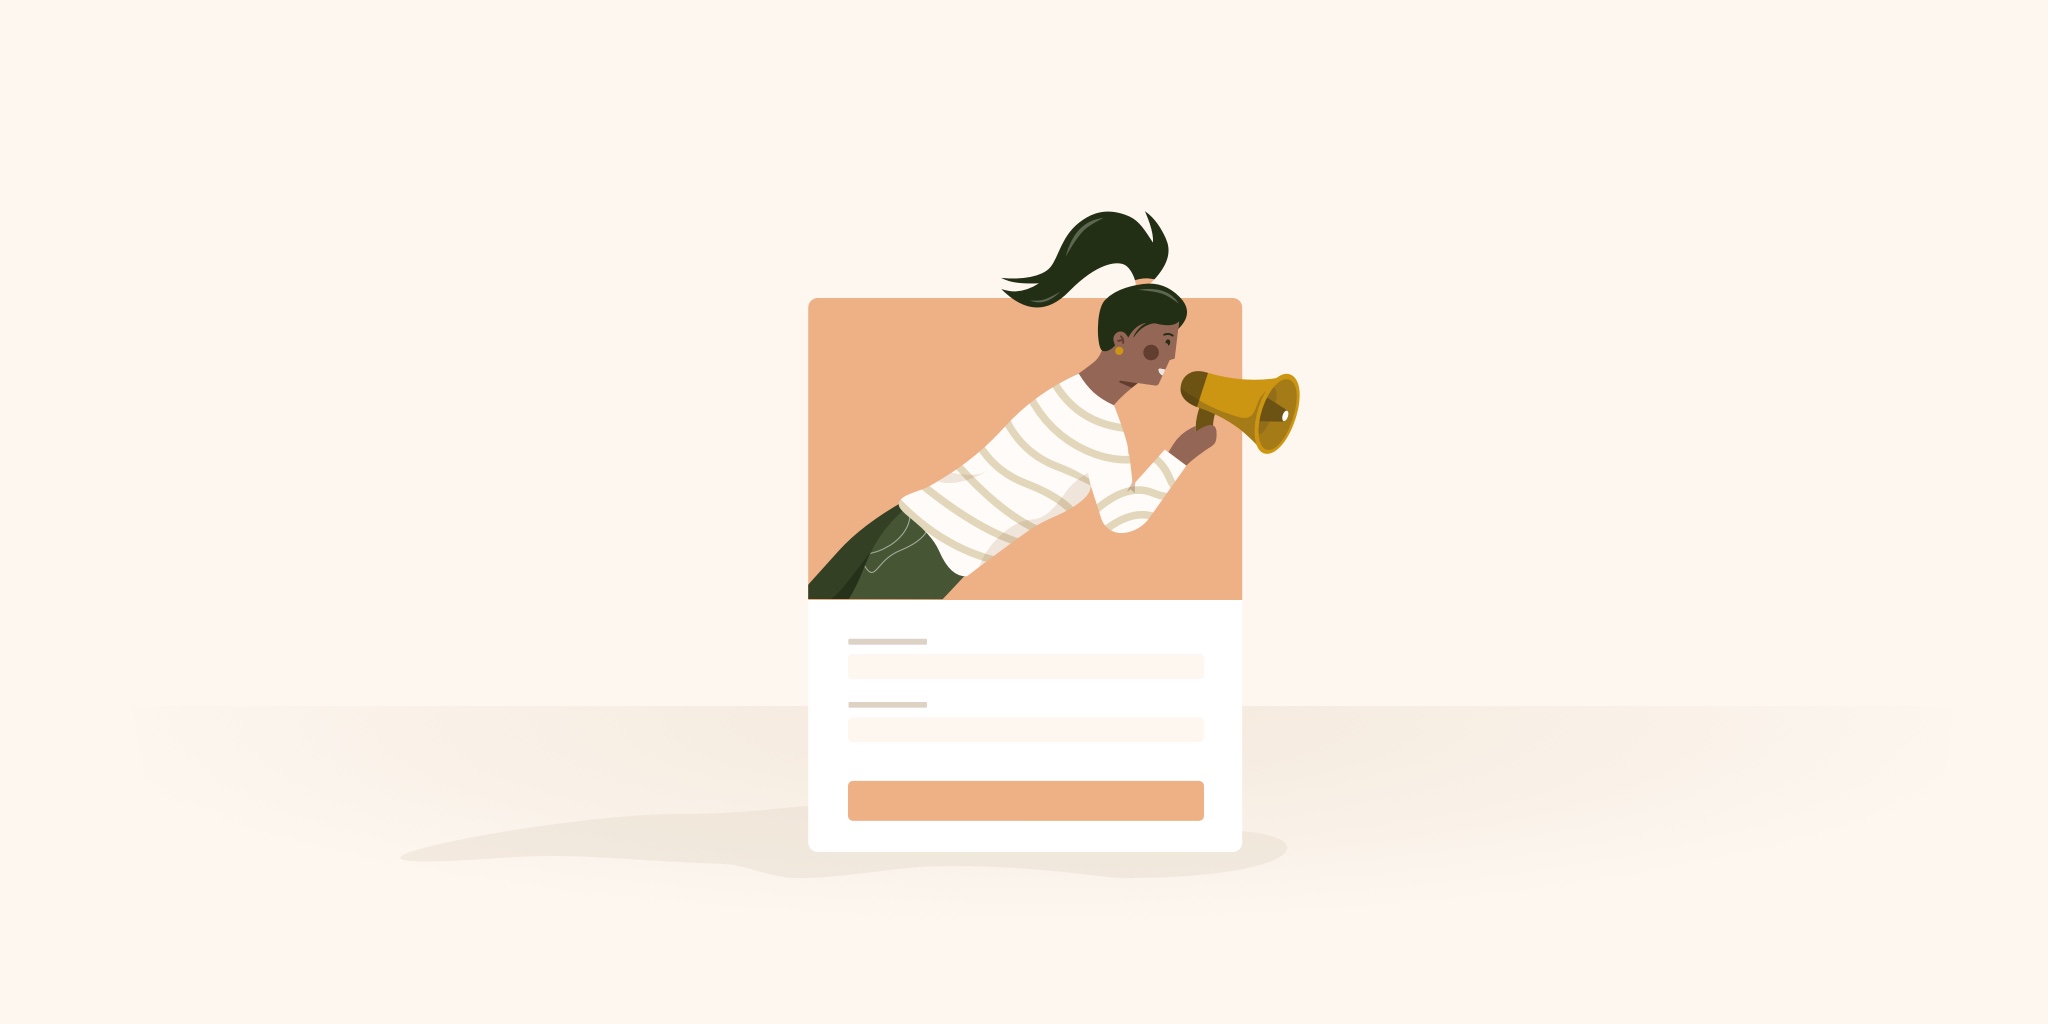 Animation of a woman holding megaphone while Promoting something